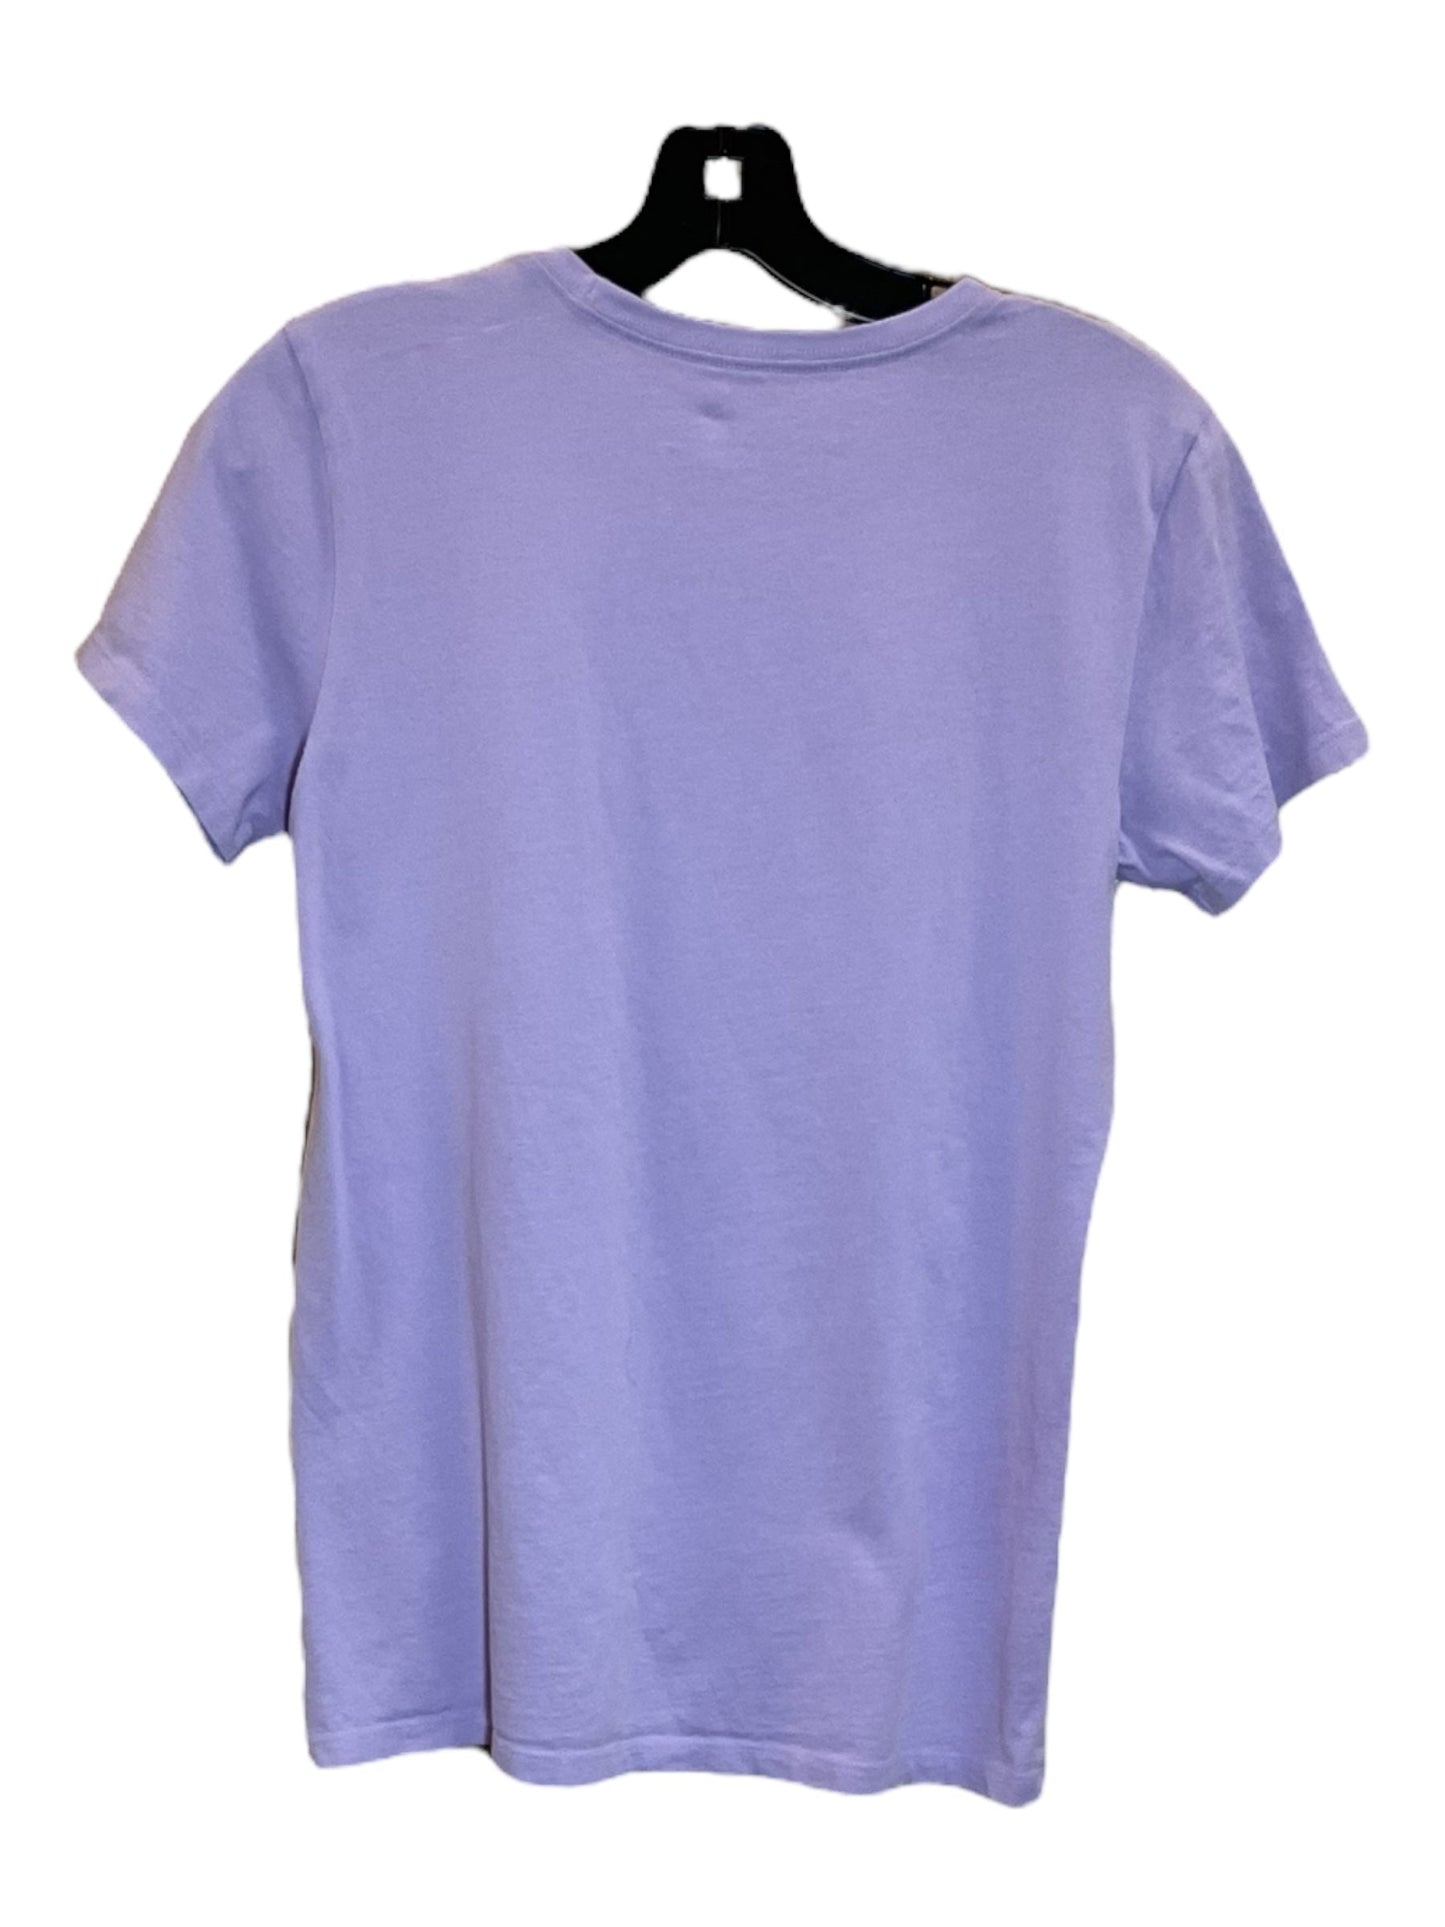 Purple Top Short Sleeve Life Is Good, Size S